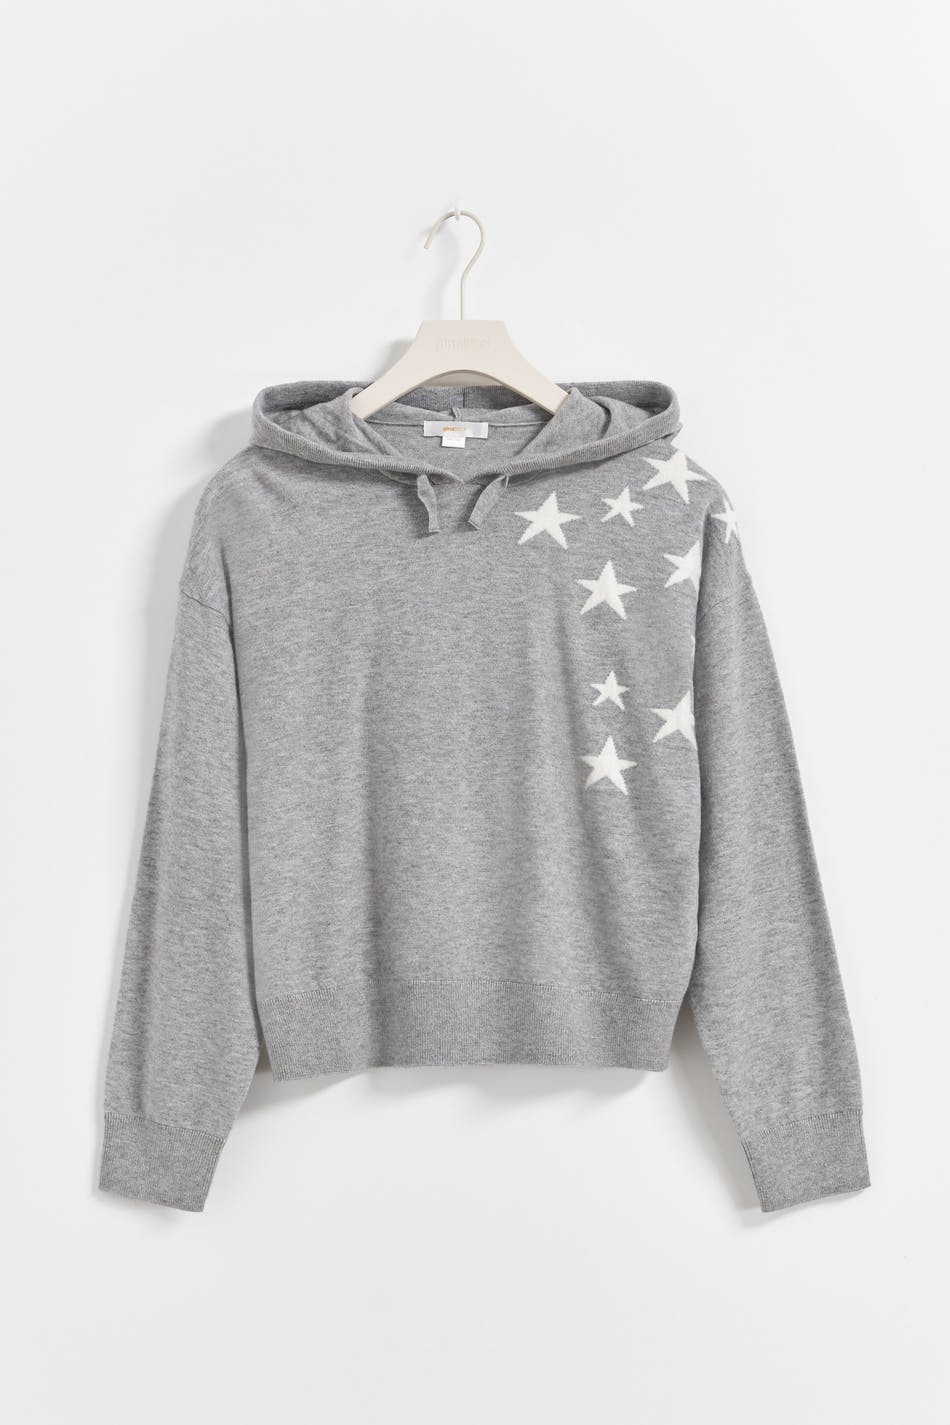 Gina Tricot - Y star knitted hoodie - young-tops - Grey - 158/164 - Female